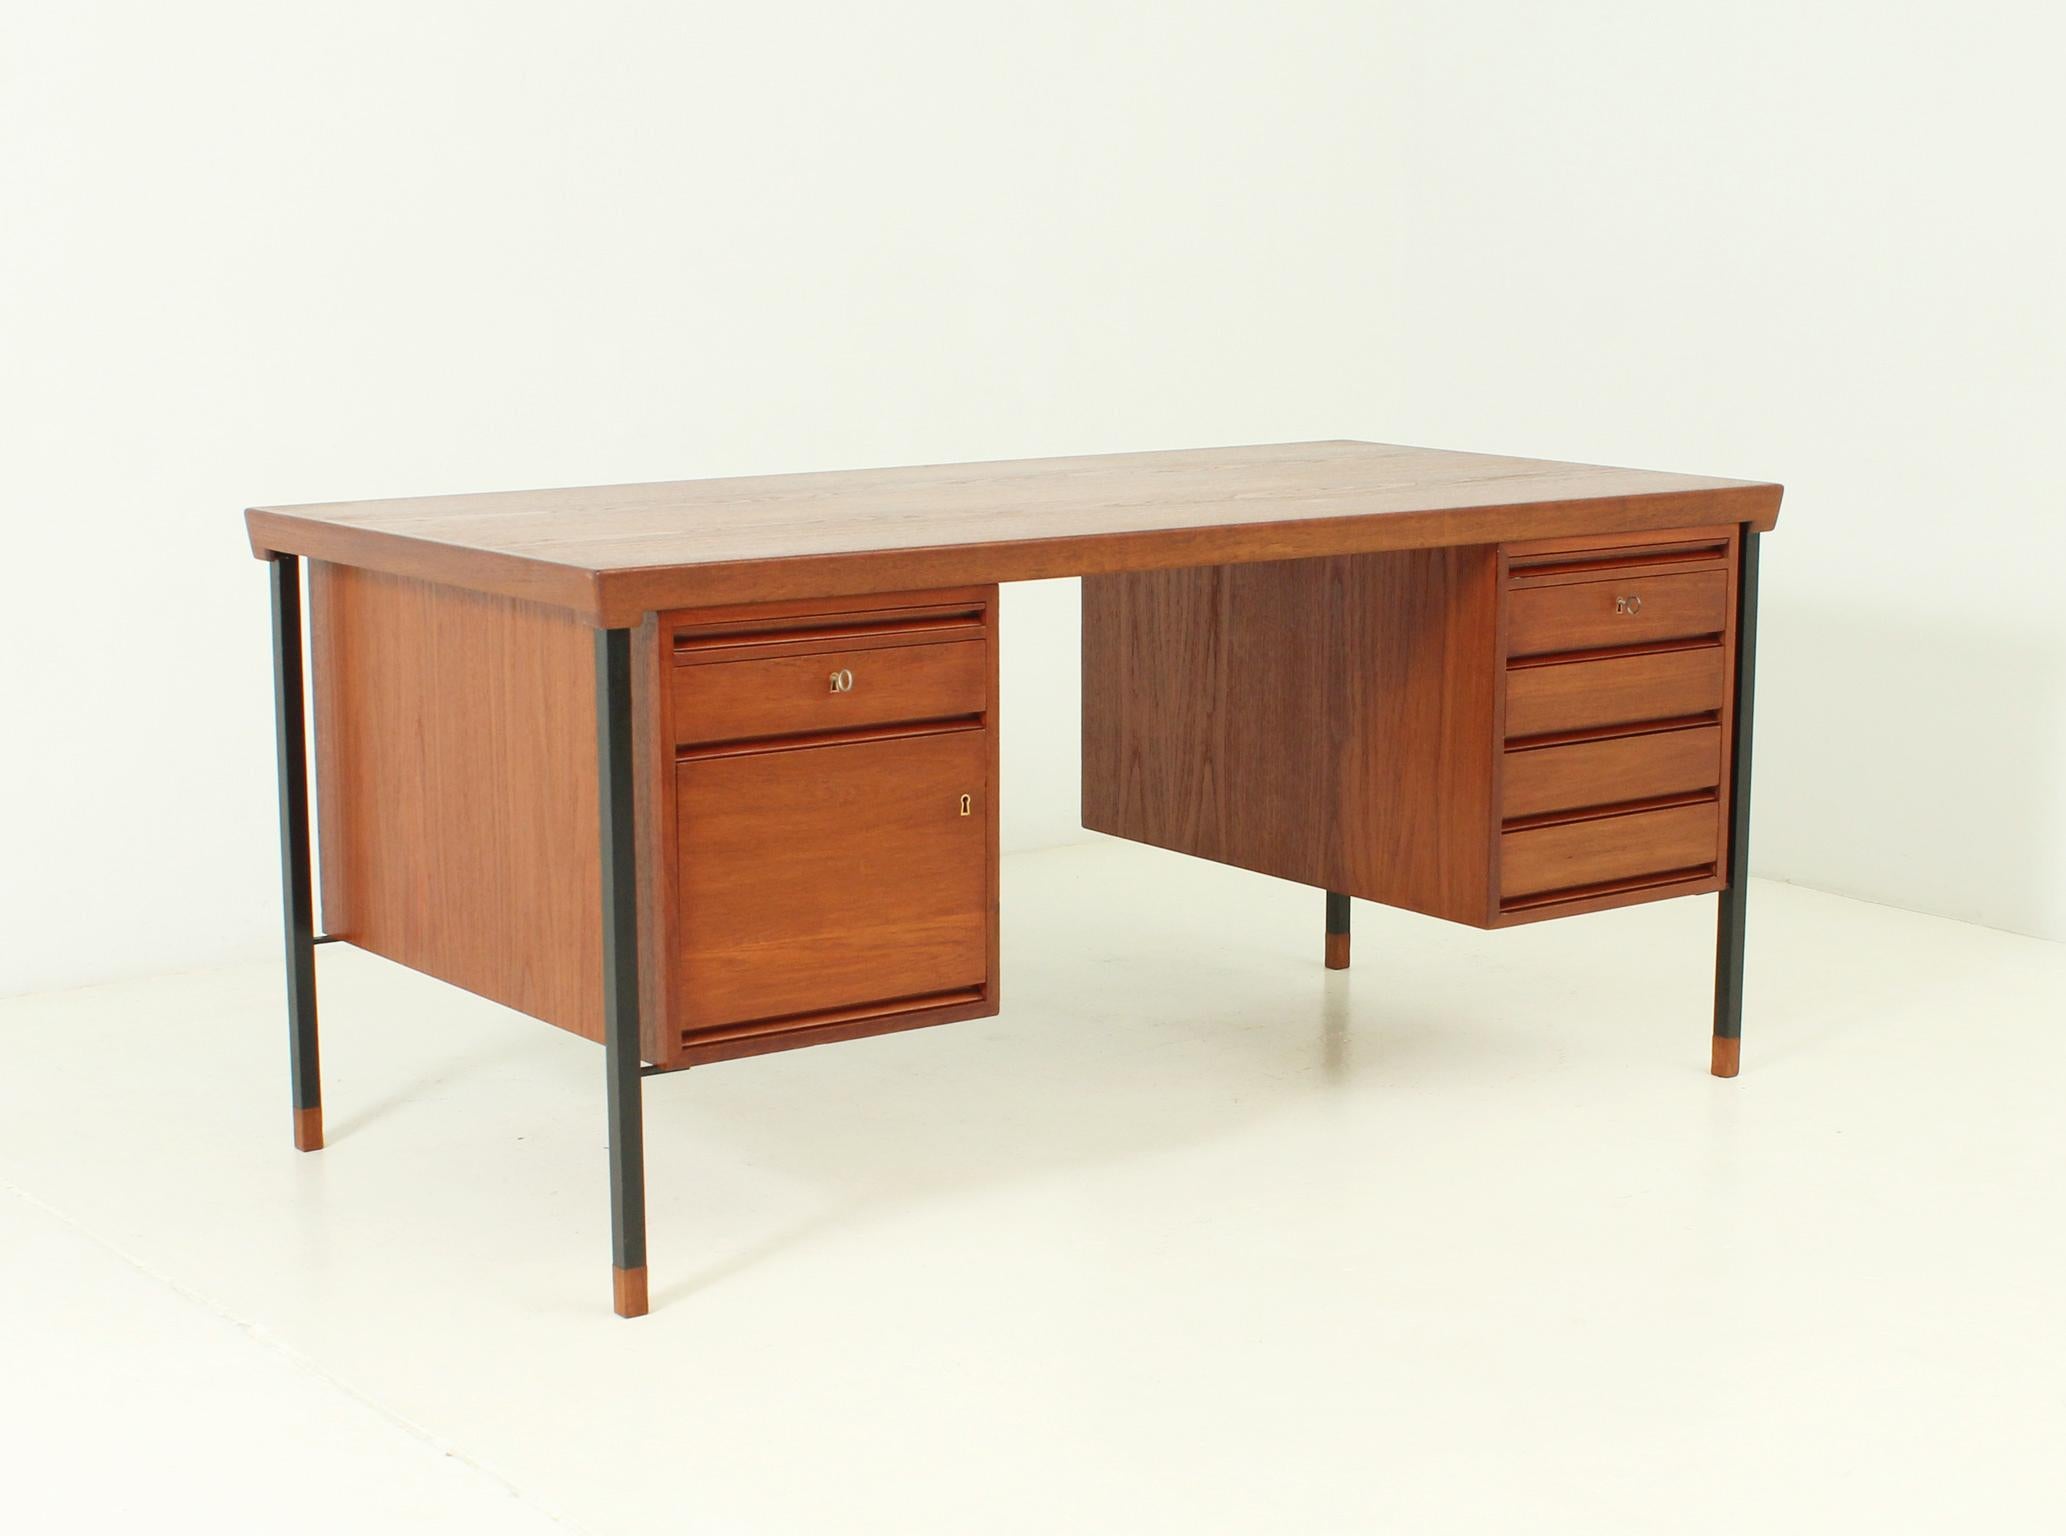 Desk designed in 1959 by danish architects Peter Hvidt and Orla Mølgaard-Nielsen for Søborg, Denmark. Two and four drawers and two writing surfaces with interior glasses, open shelves in front side. Teak, glass and lacquered metal.